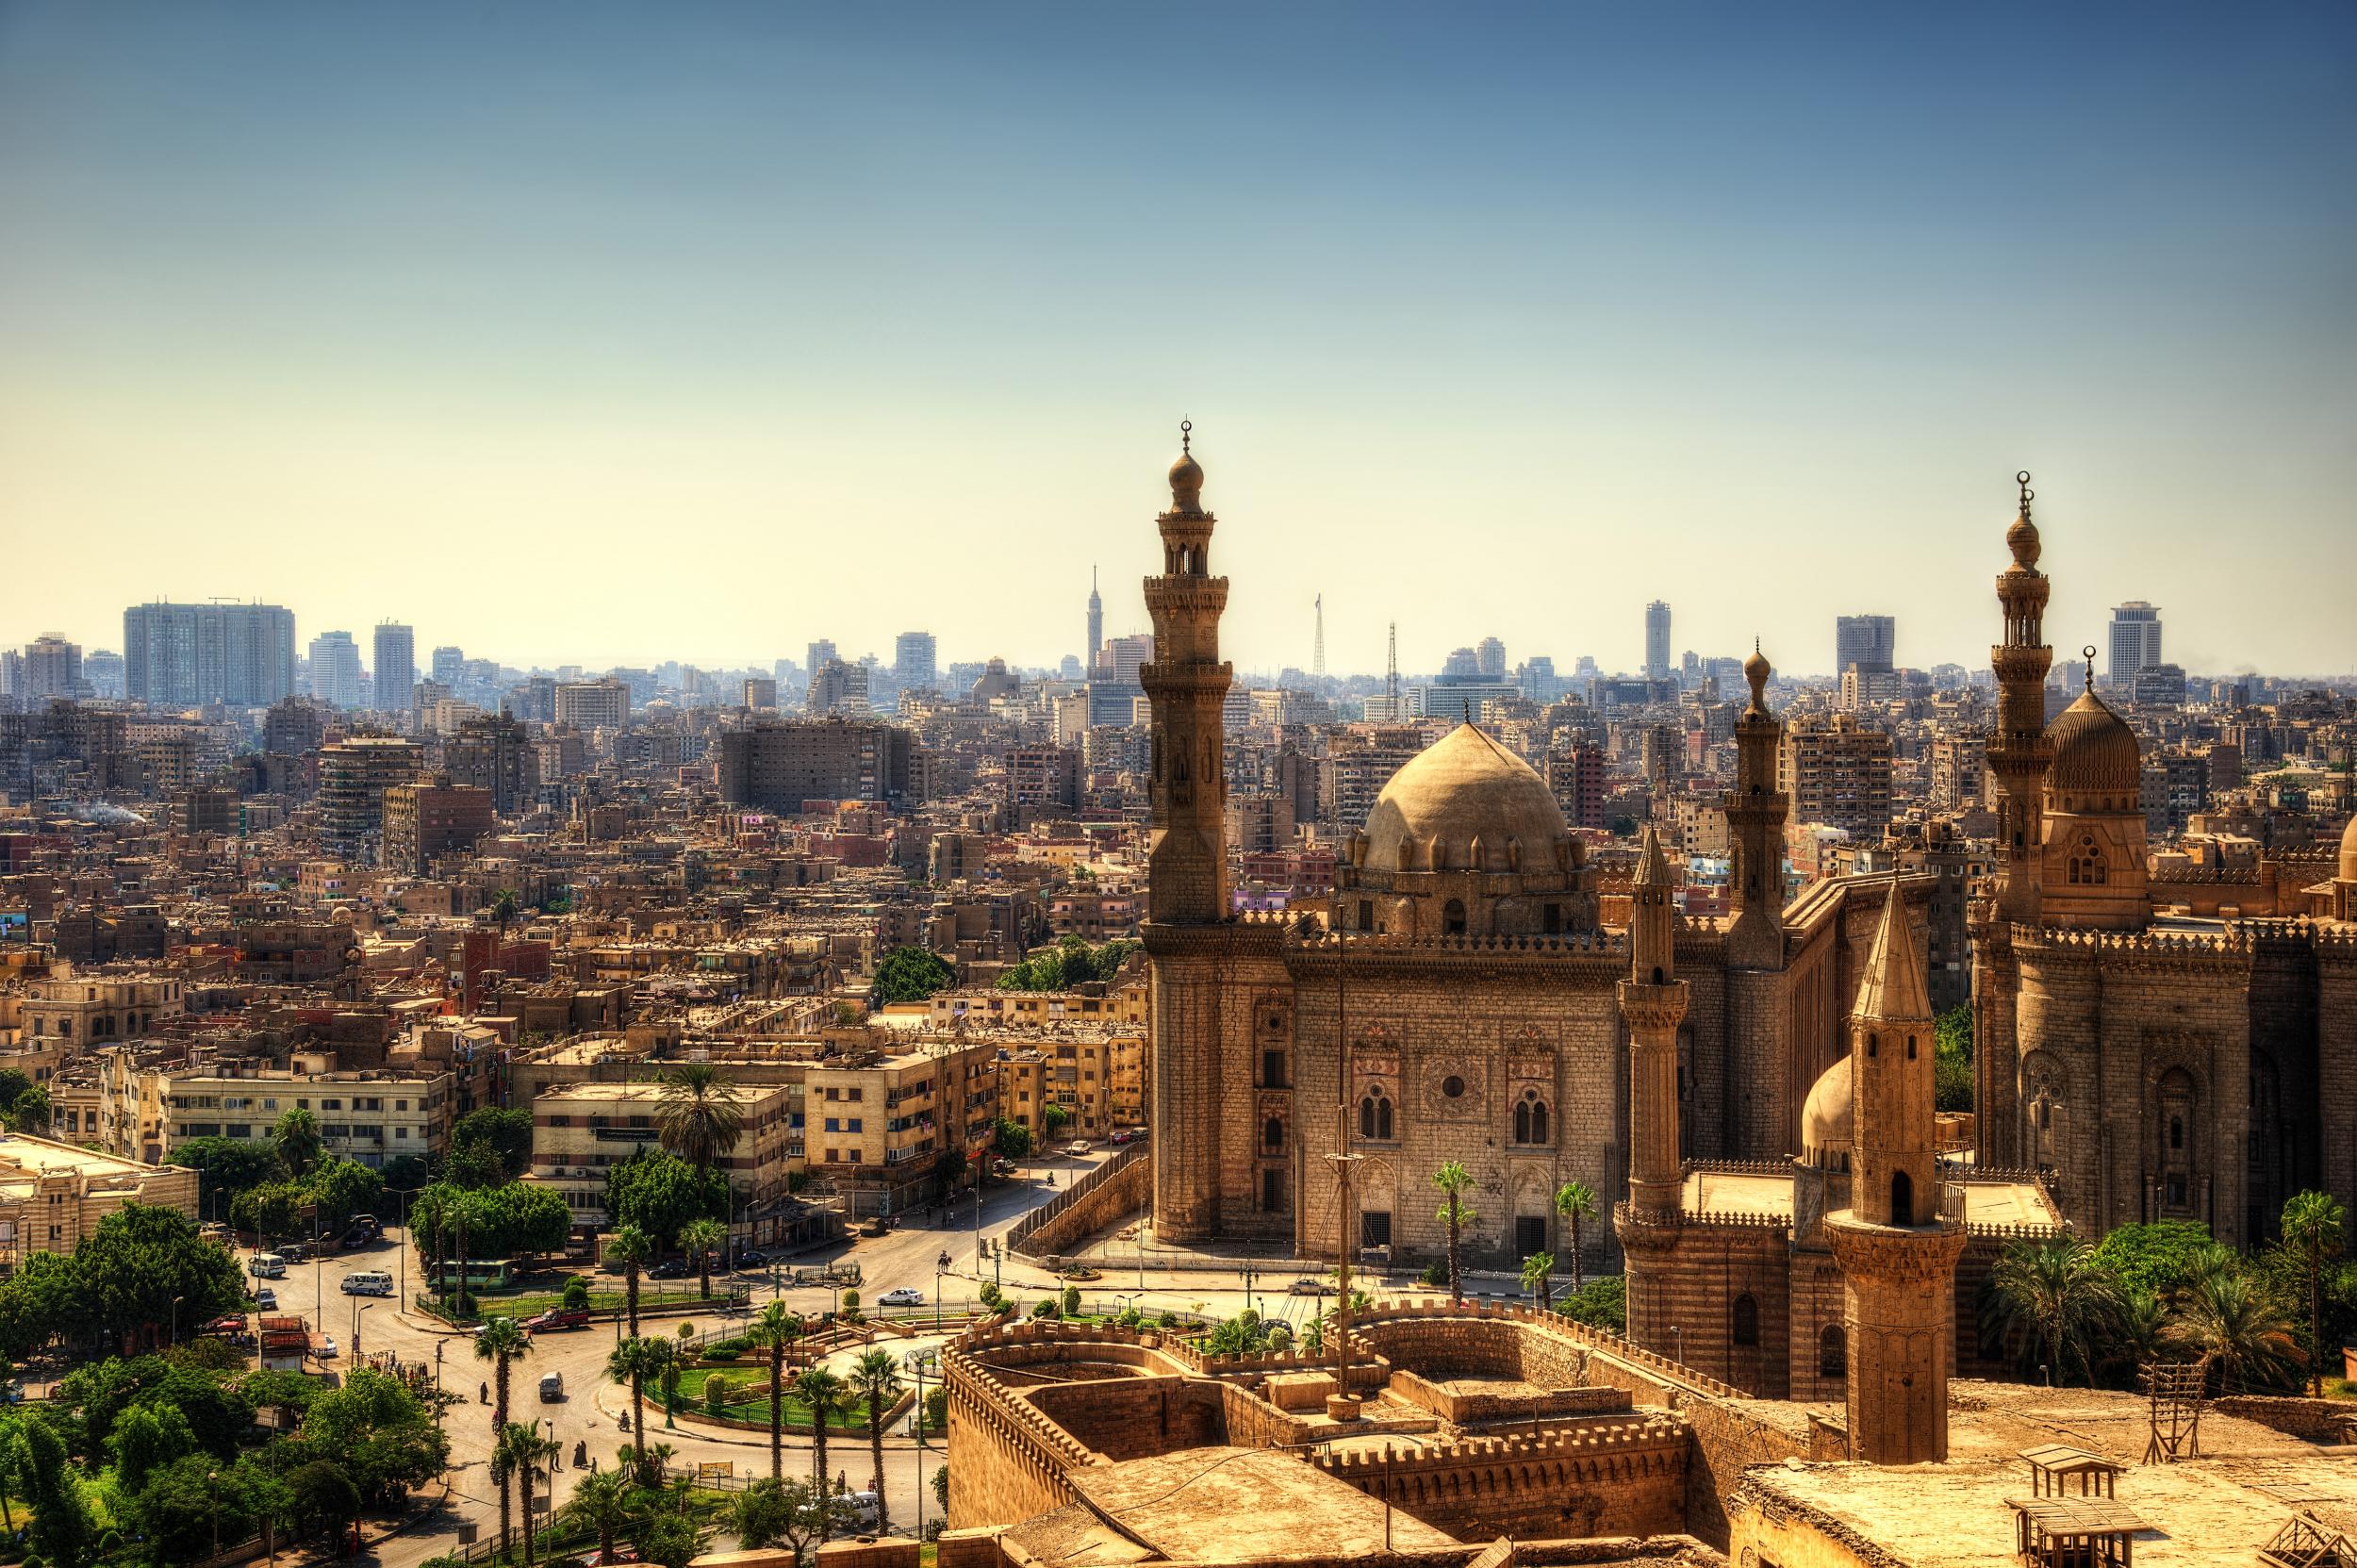 Tourism is on the up in Cairo